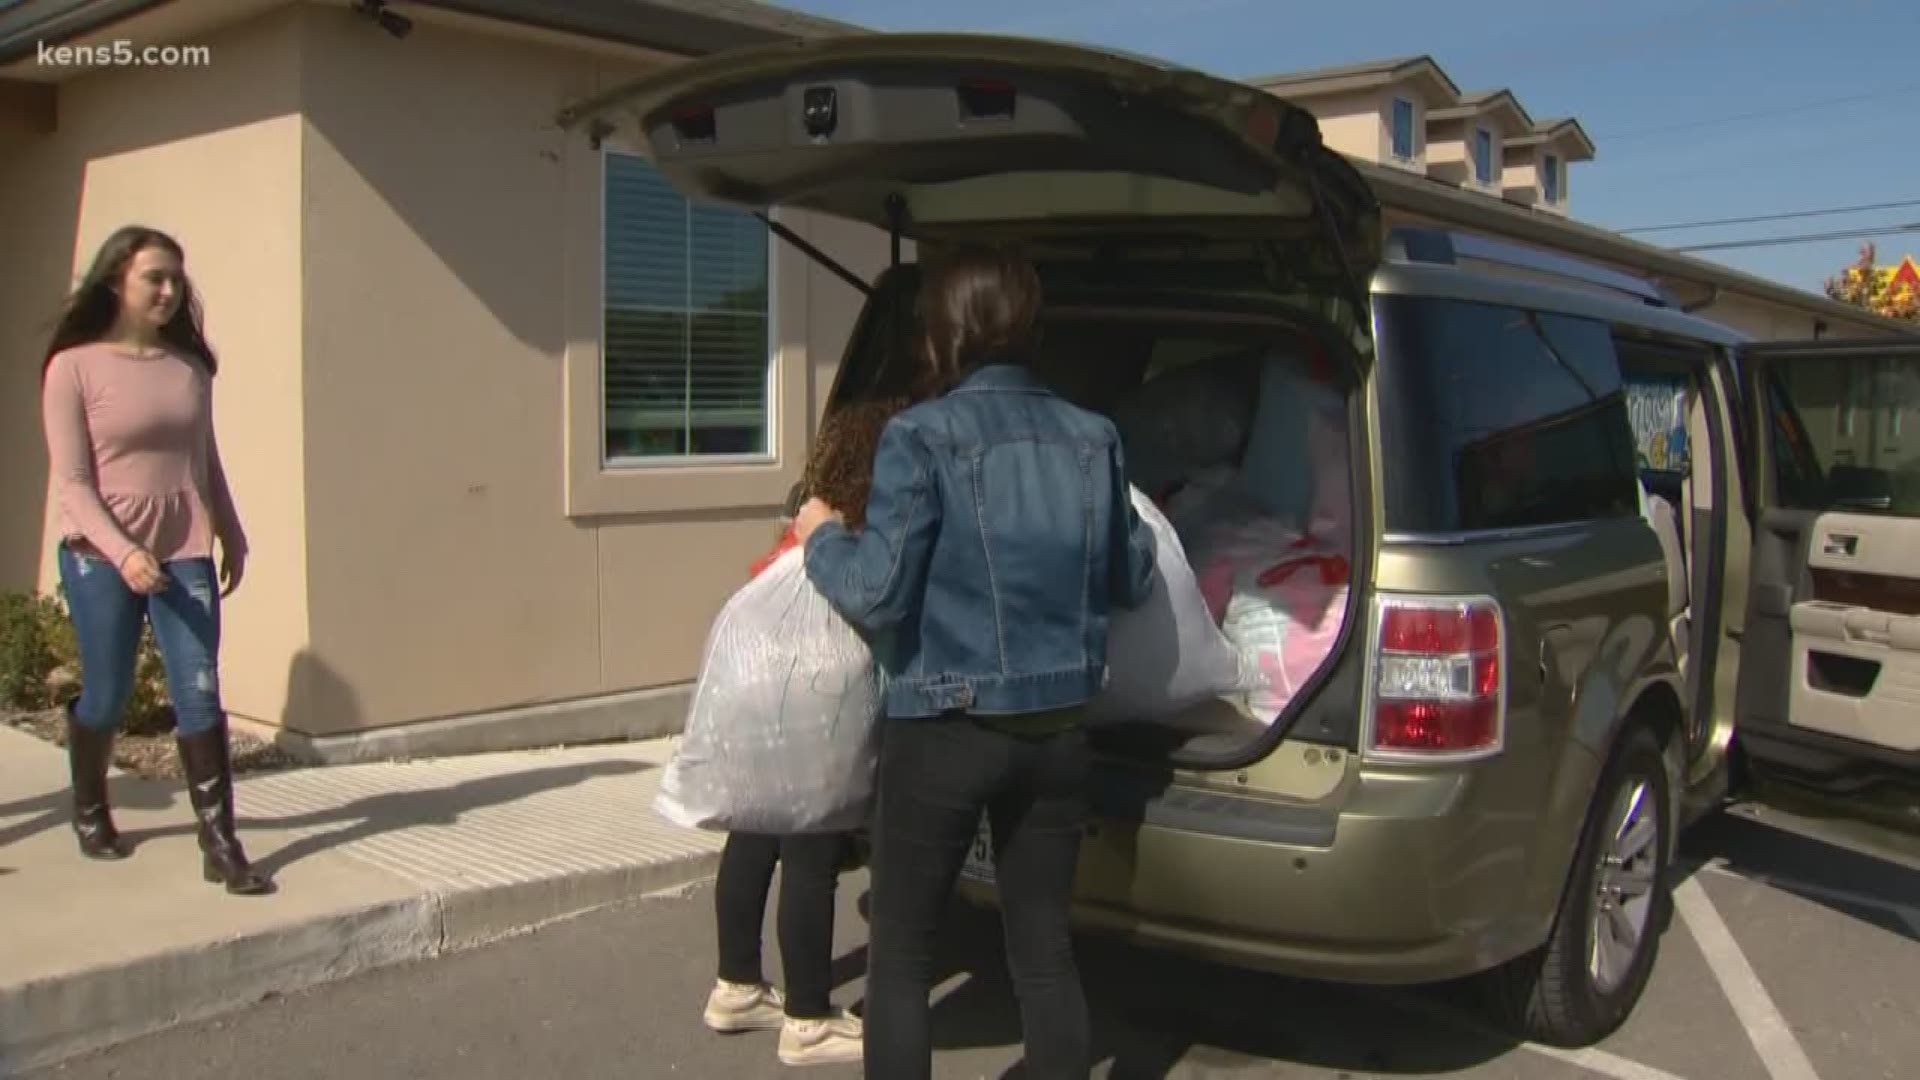 A local teen is going above and beyond to help others in need. Samantha Sanchez helped collect 200 blankets for children at emergency shelters.